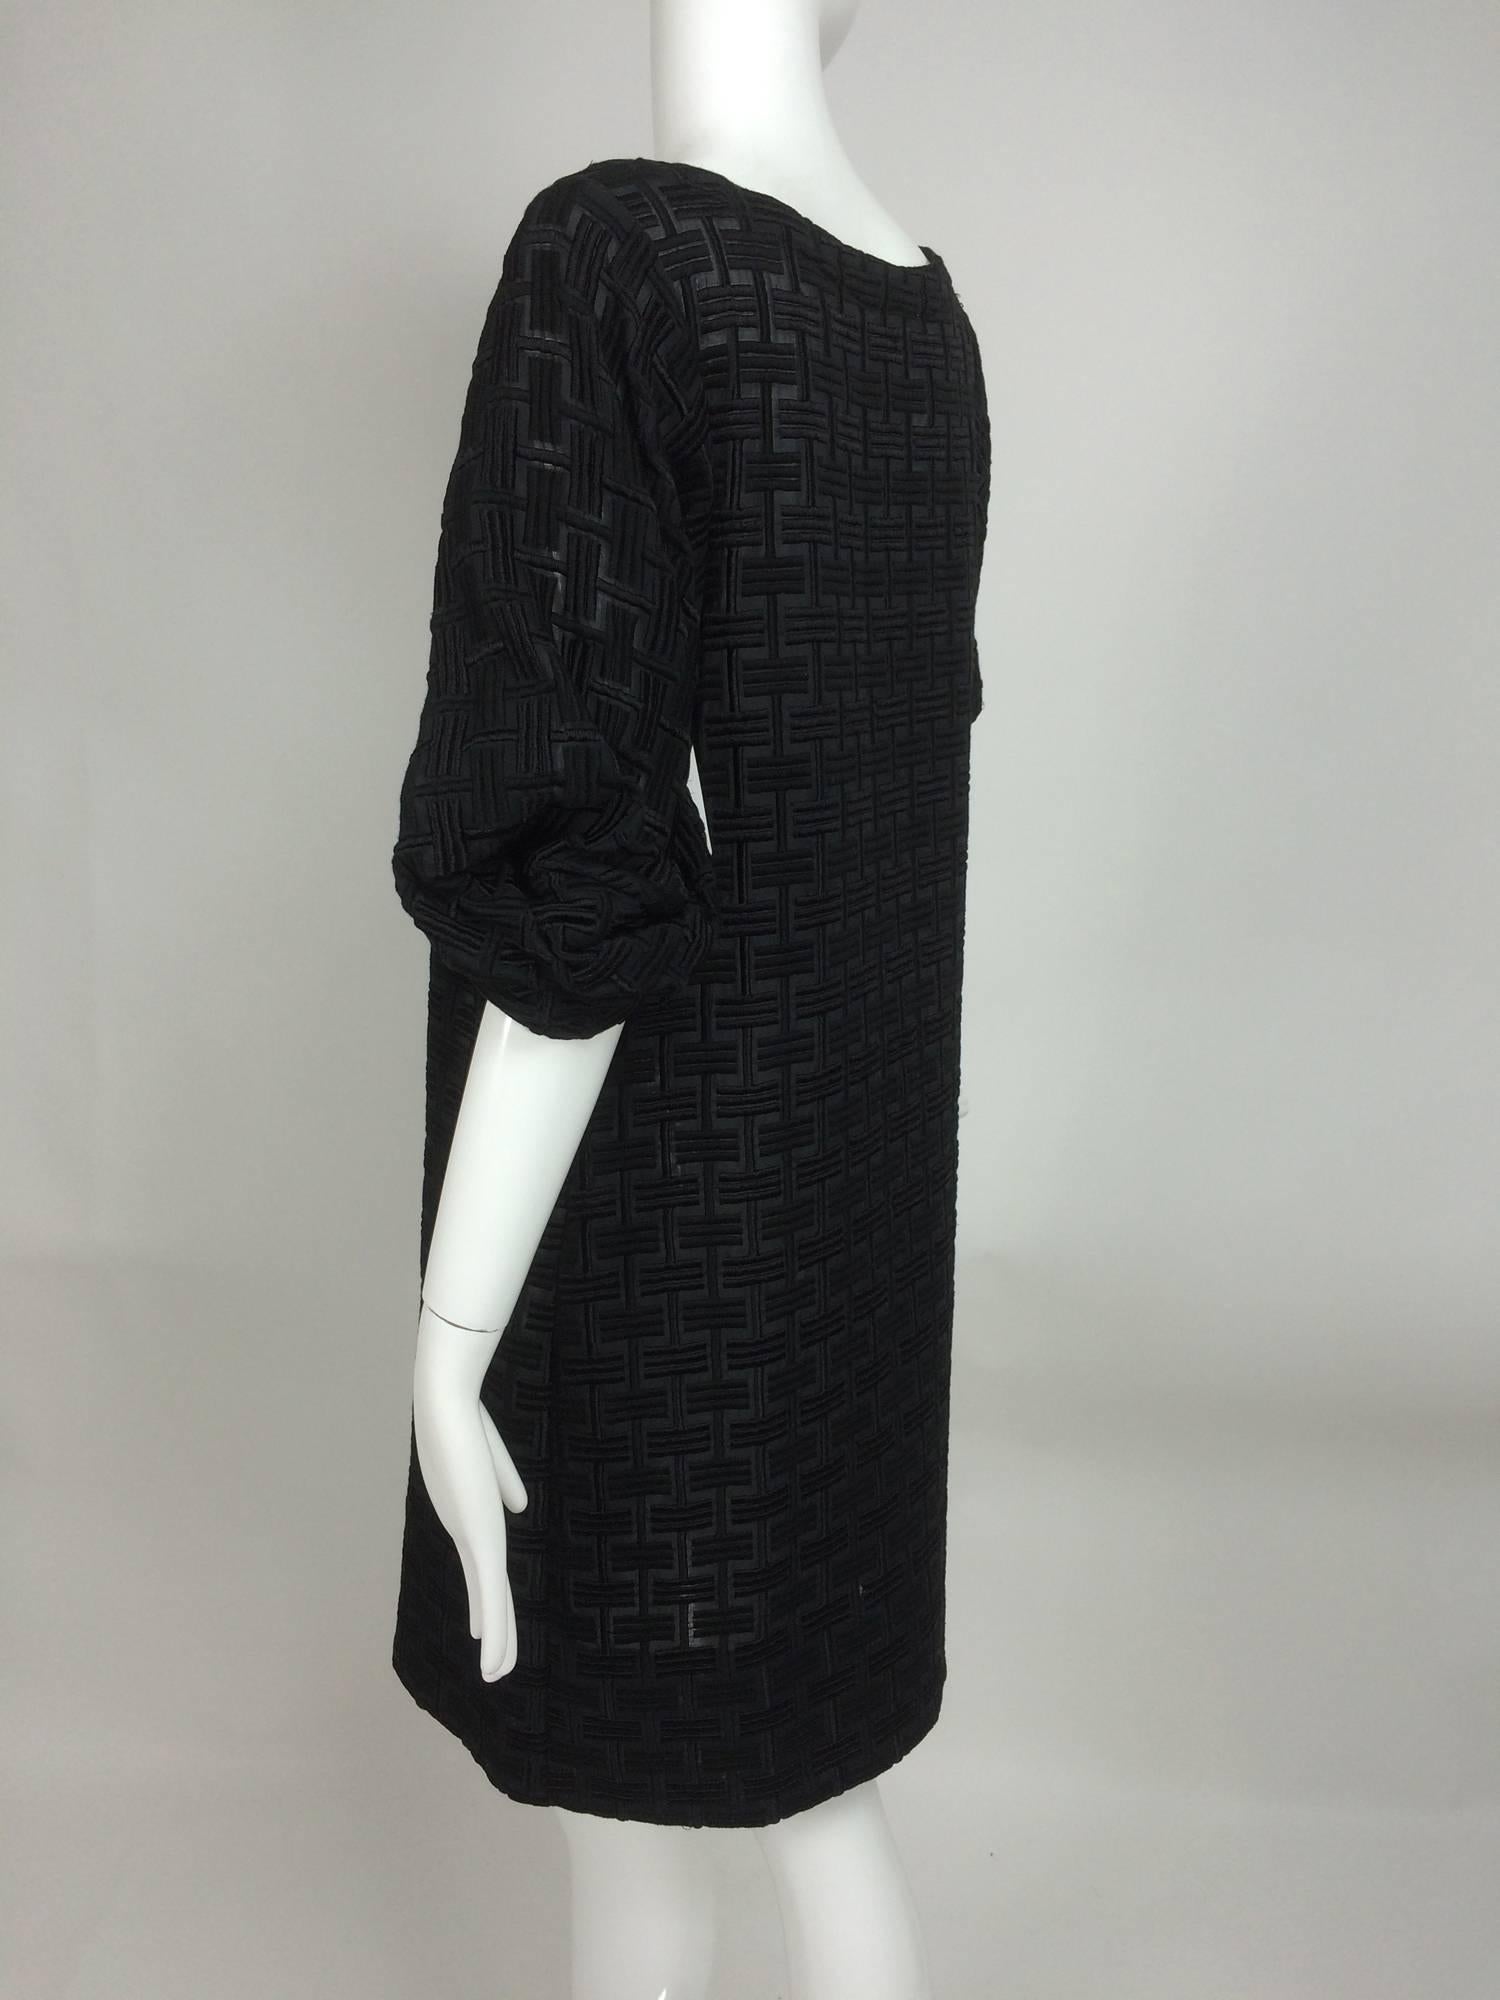 Marni heavily embroidered sheer black cotton day dress...Scoop neck dress with full sleeves that are gathered at the elbow and drape at the sleeve back...A line shape dress is heavily embroidered in a grid pattern in alternating black shades (very